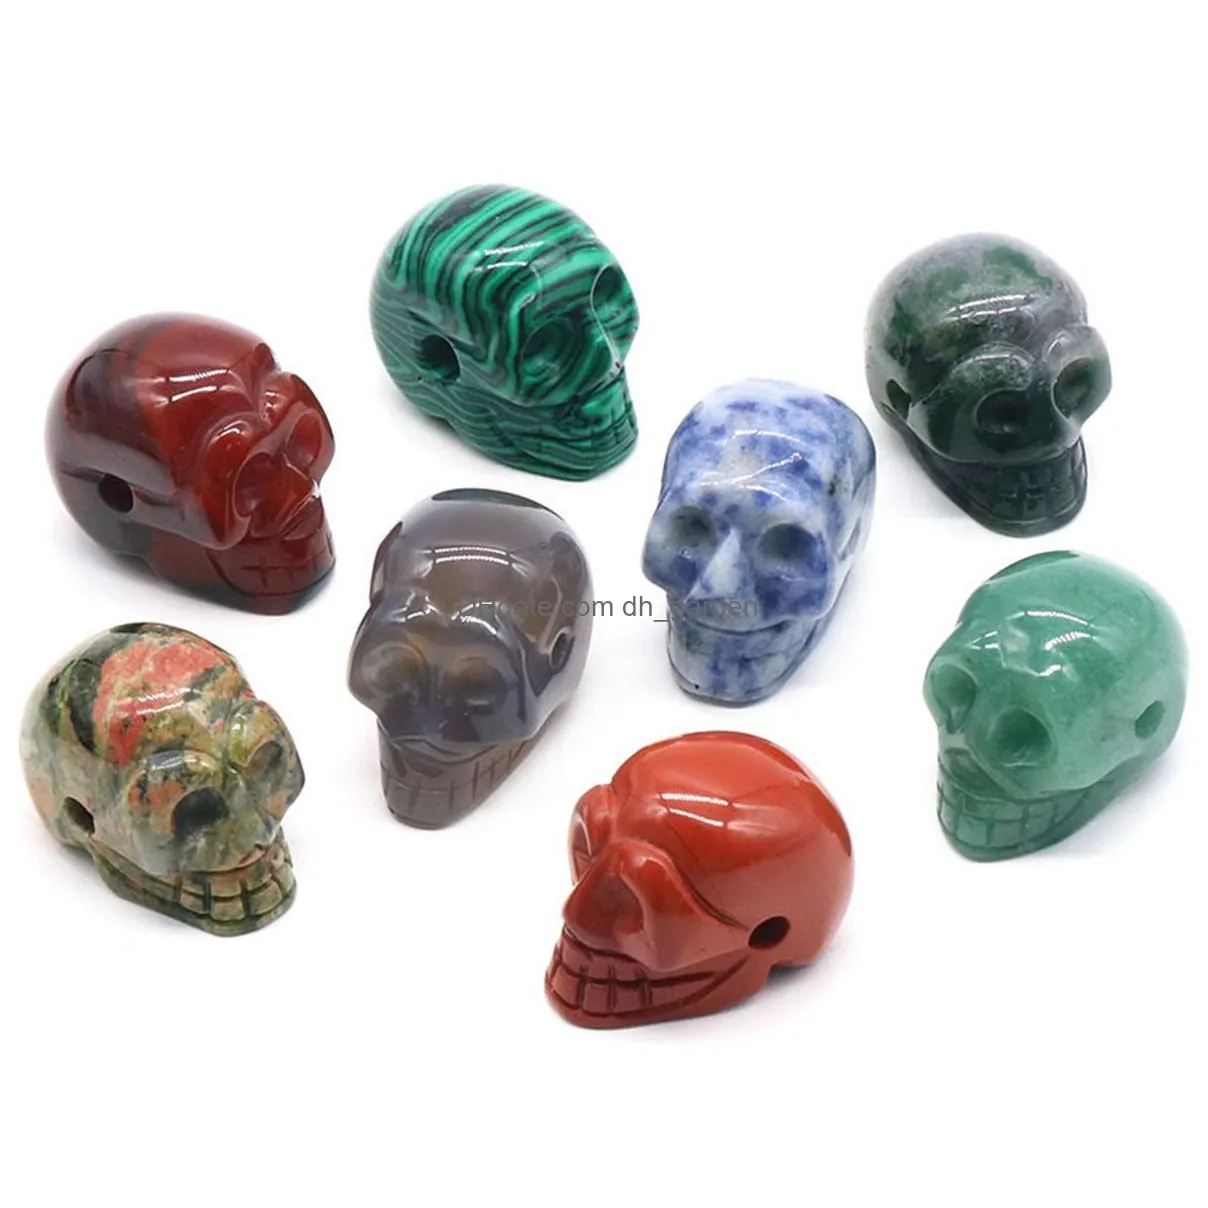 23mm natural turquoise stone skull hand carved human skull head sculpture gemstone carving